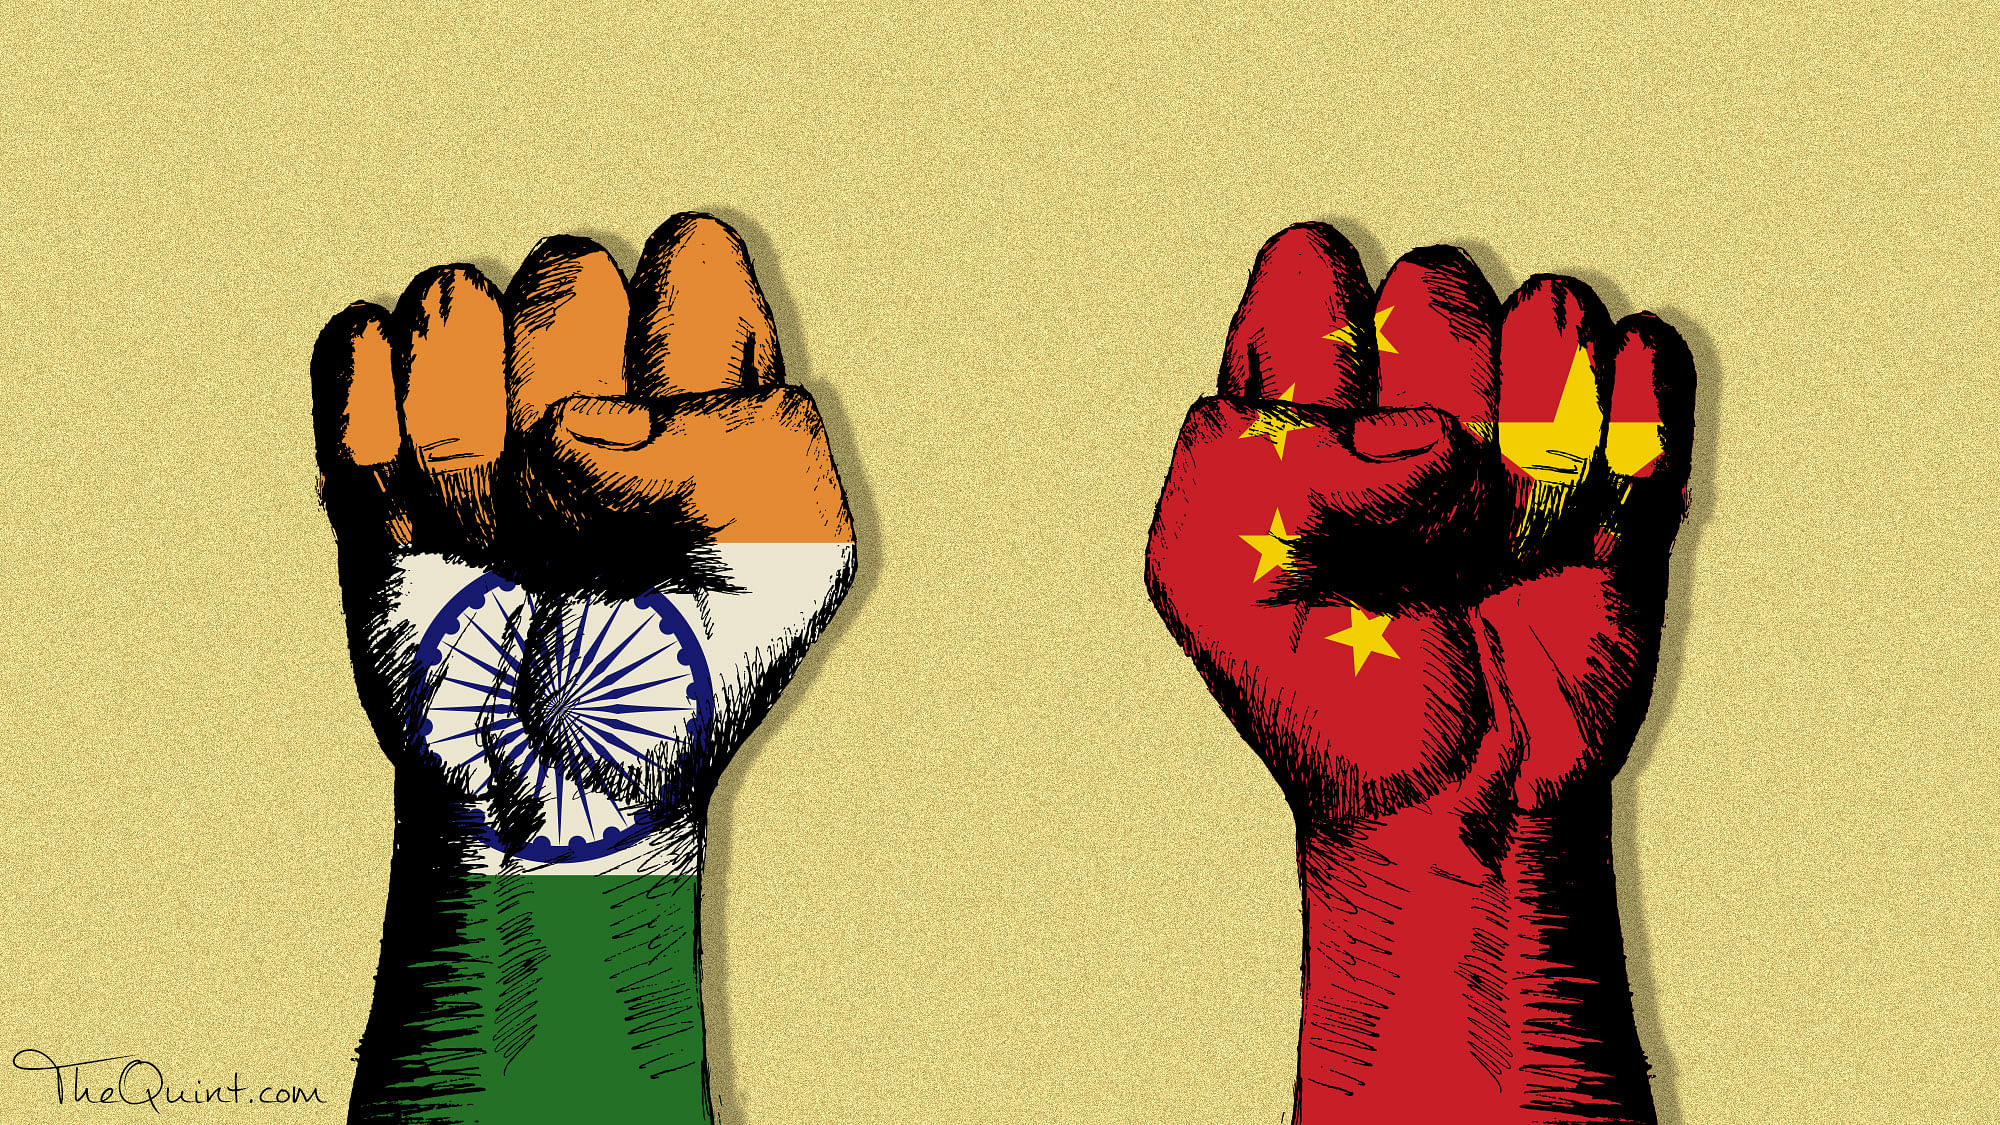 

Members of the Indian-Chinese community is worried about tension between India and China and hopes there’s no repeat of 1962 war.